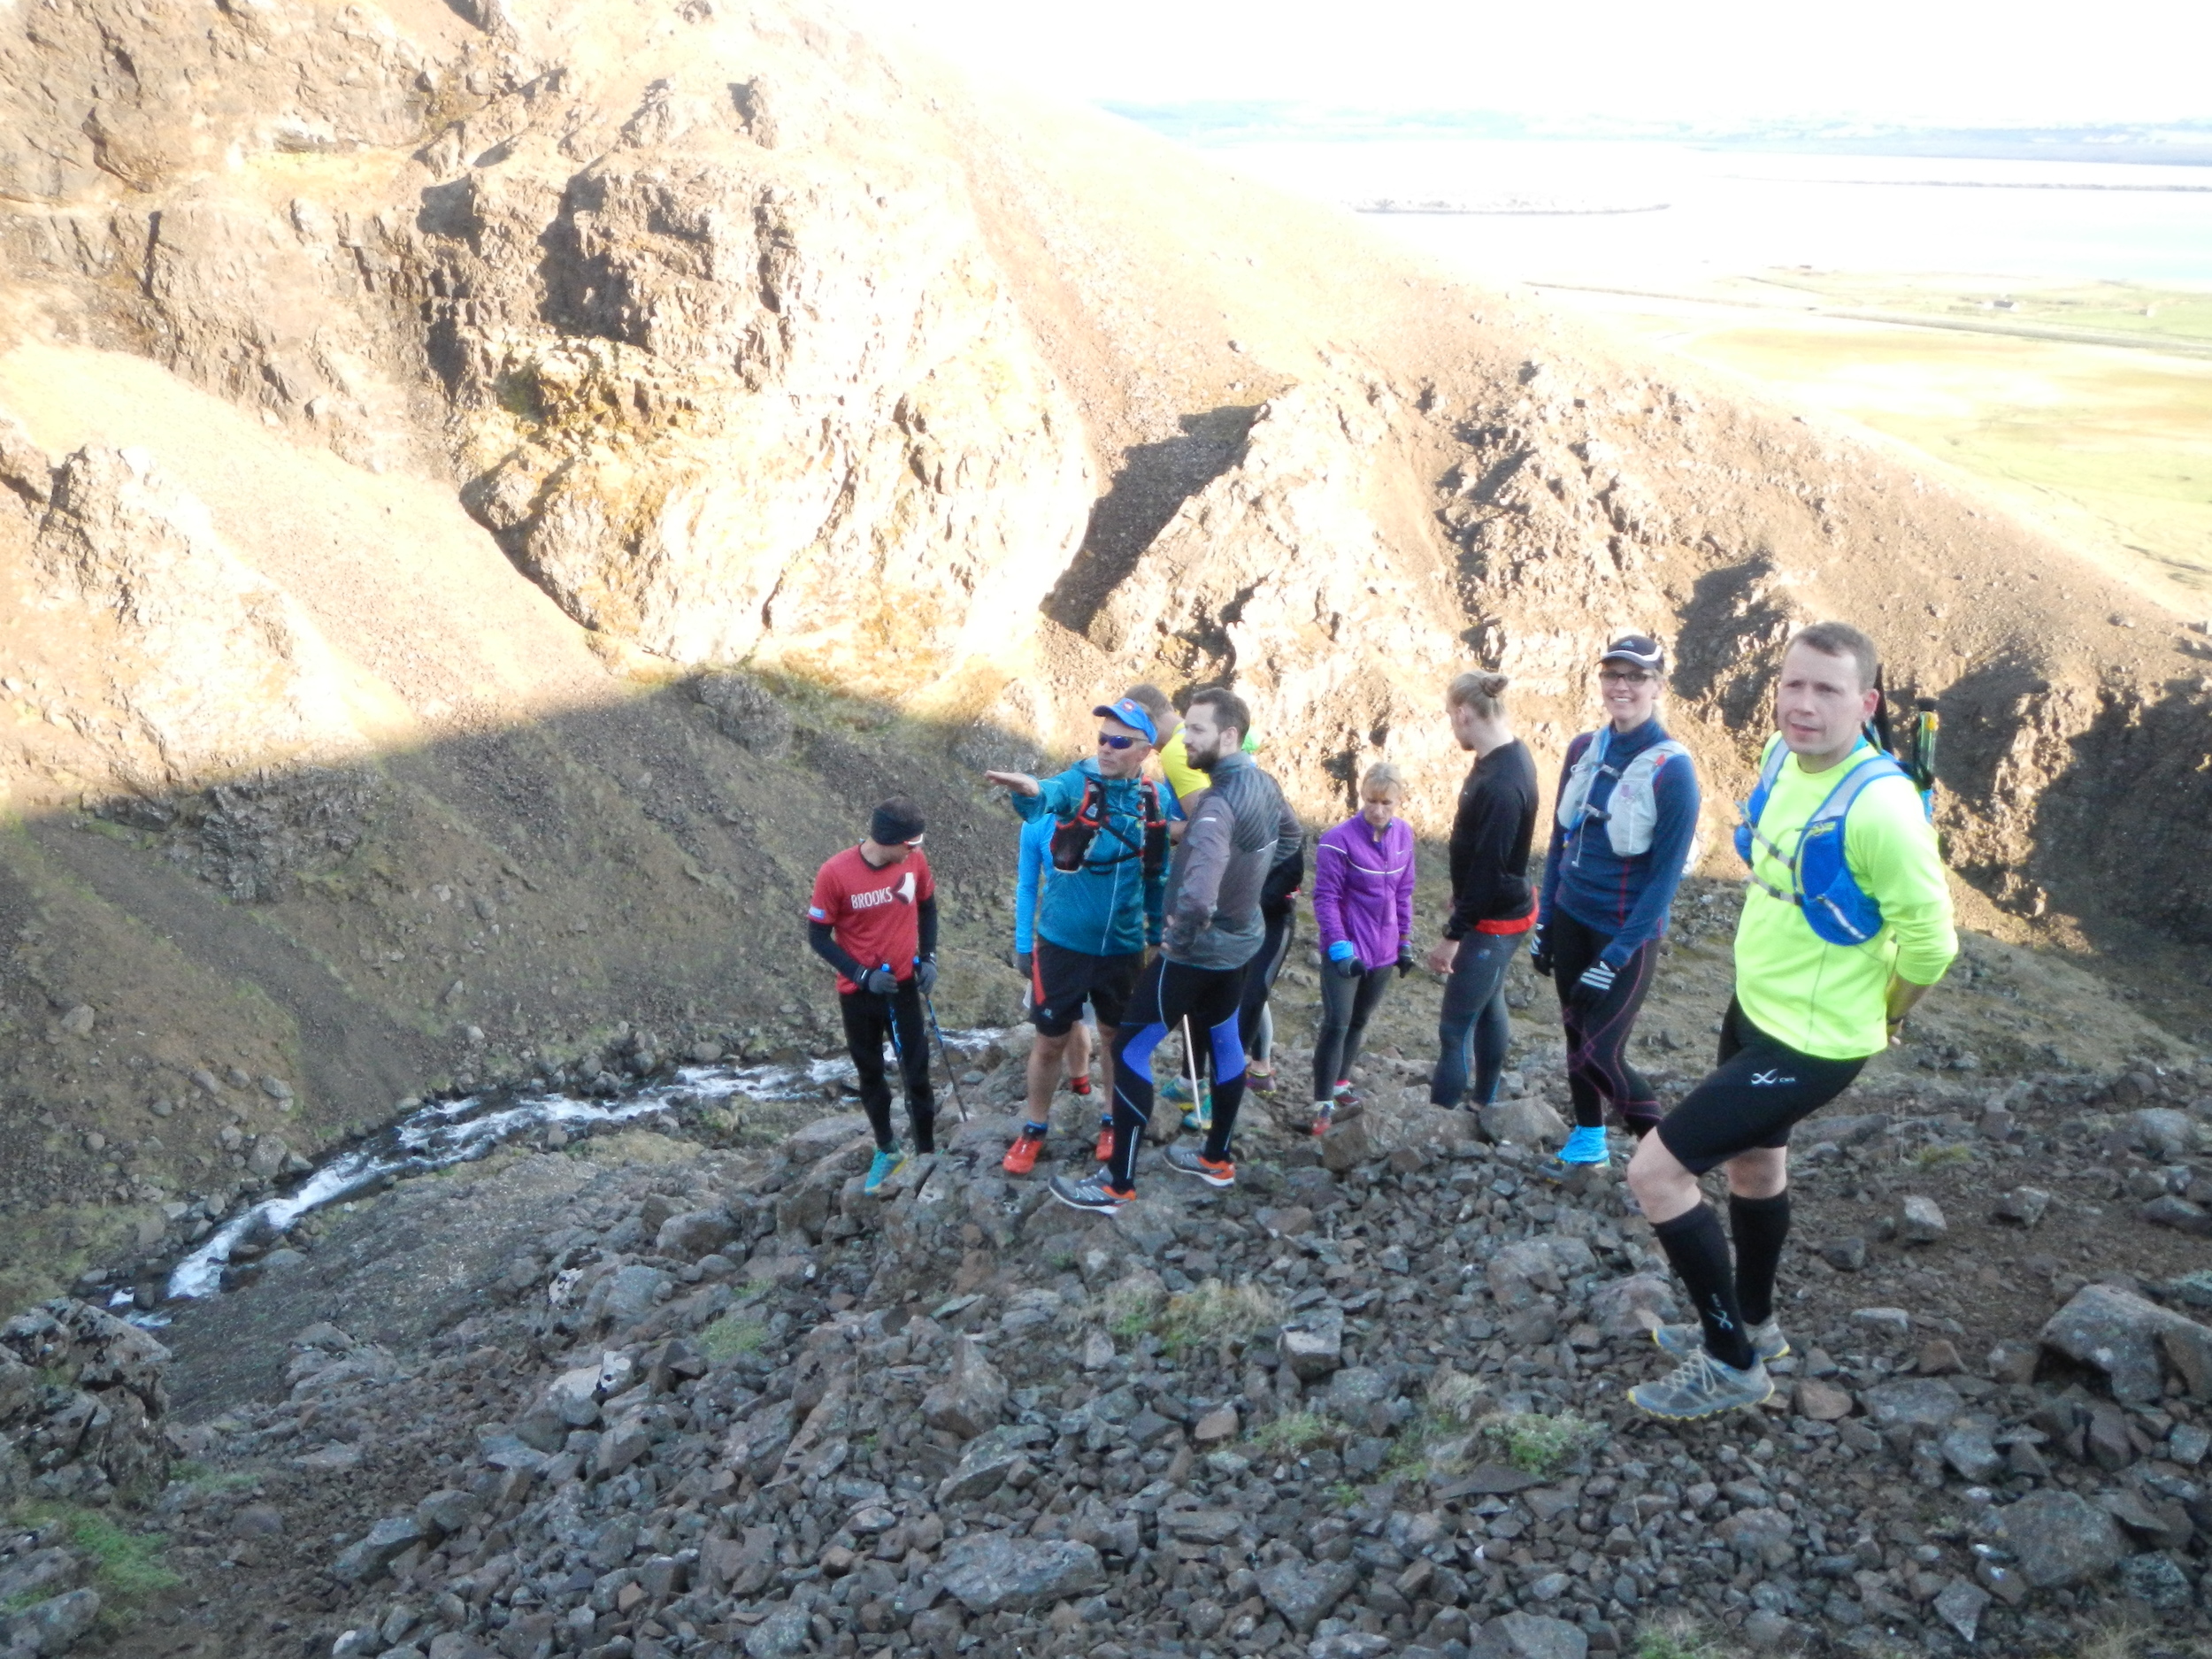 A running group looking around in a ravine